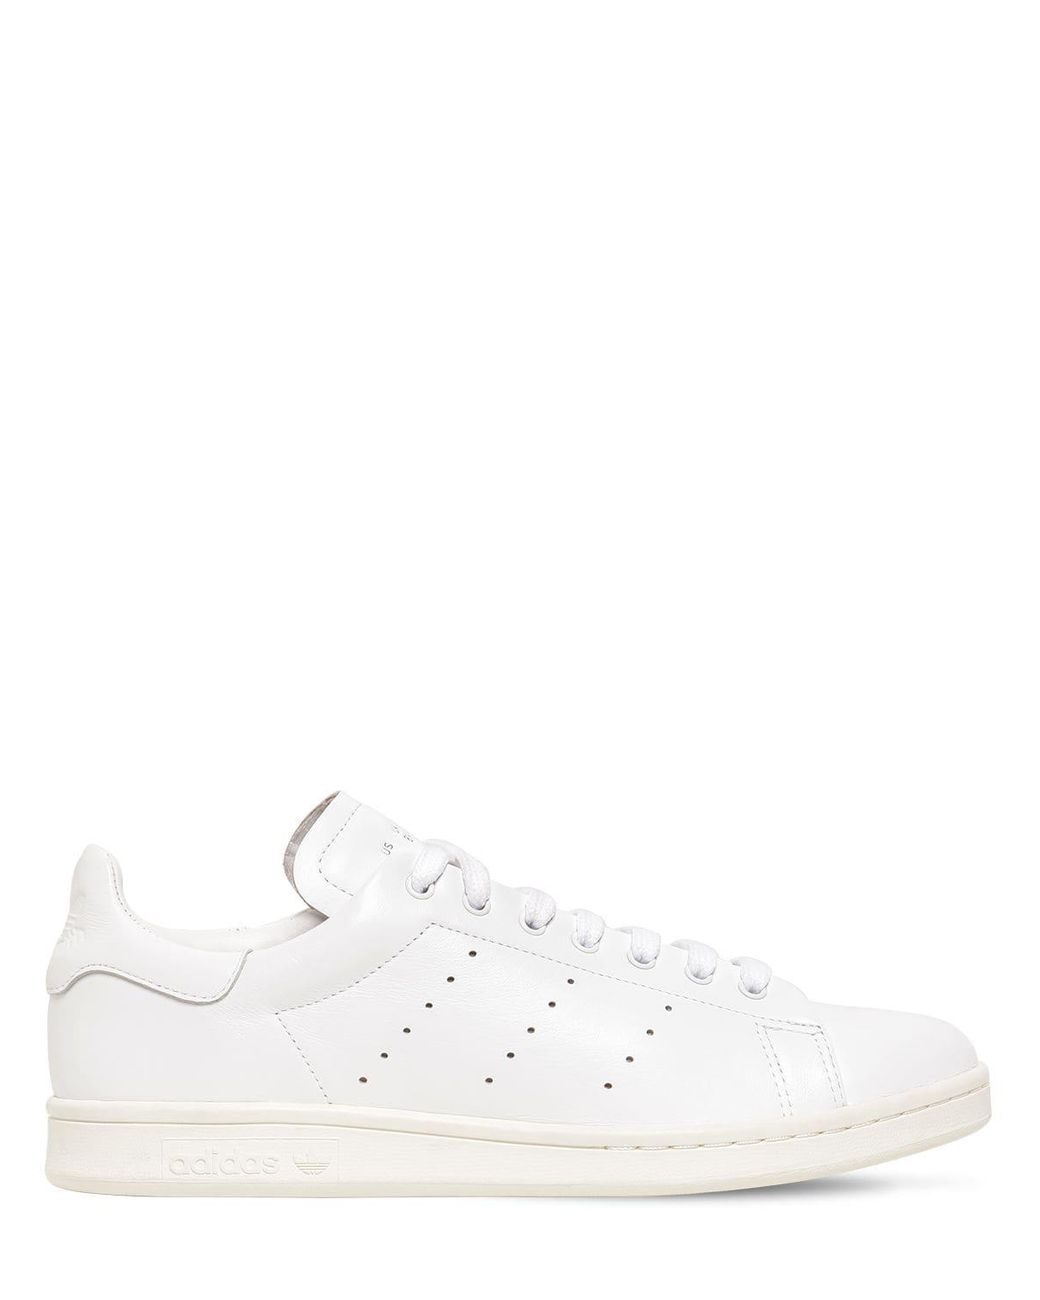 adidas Originals Stan Smith Recon Leather Sneakers in White - Lyst